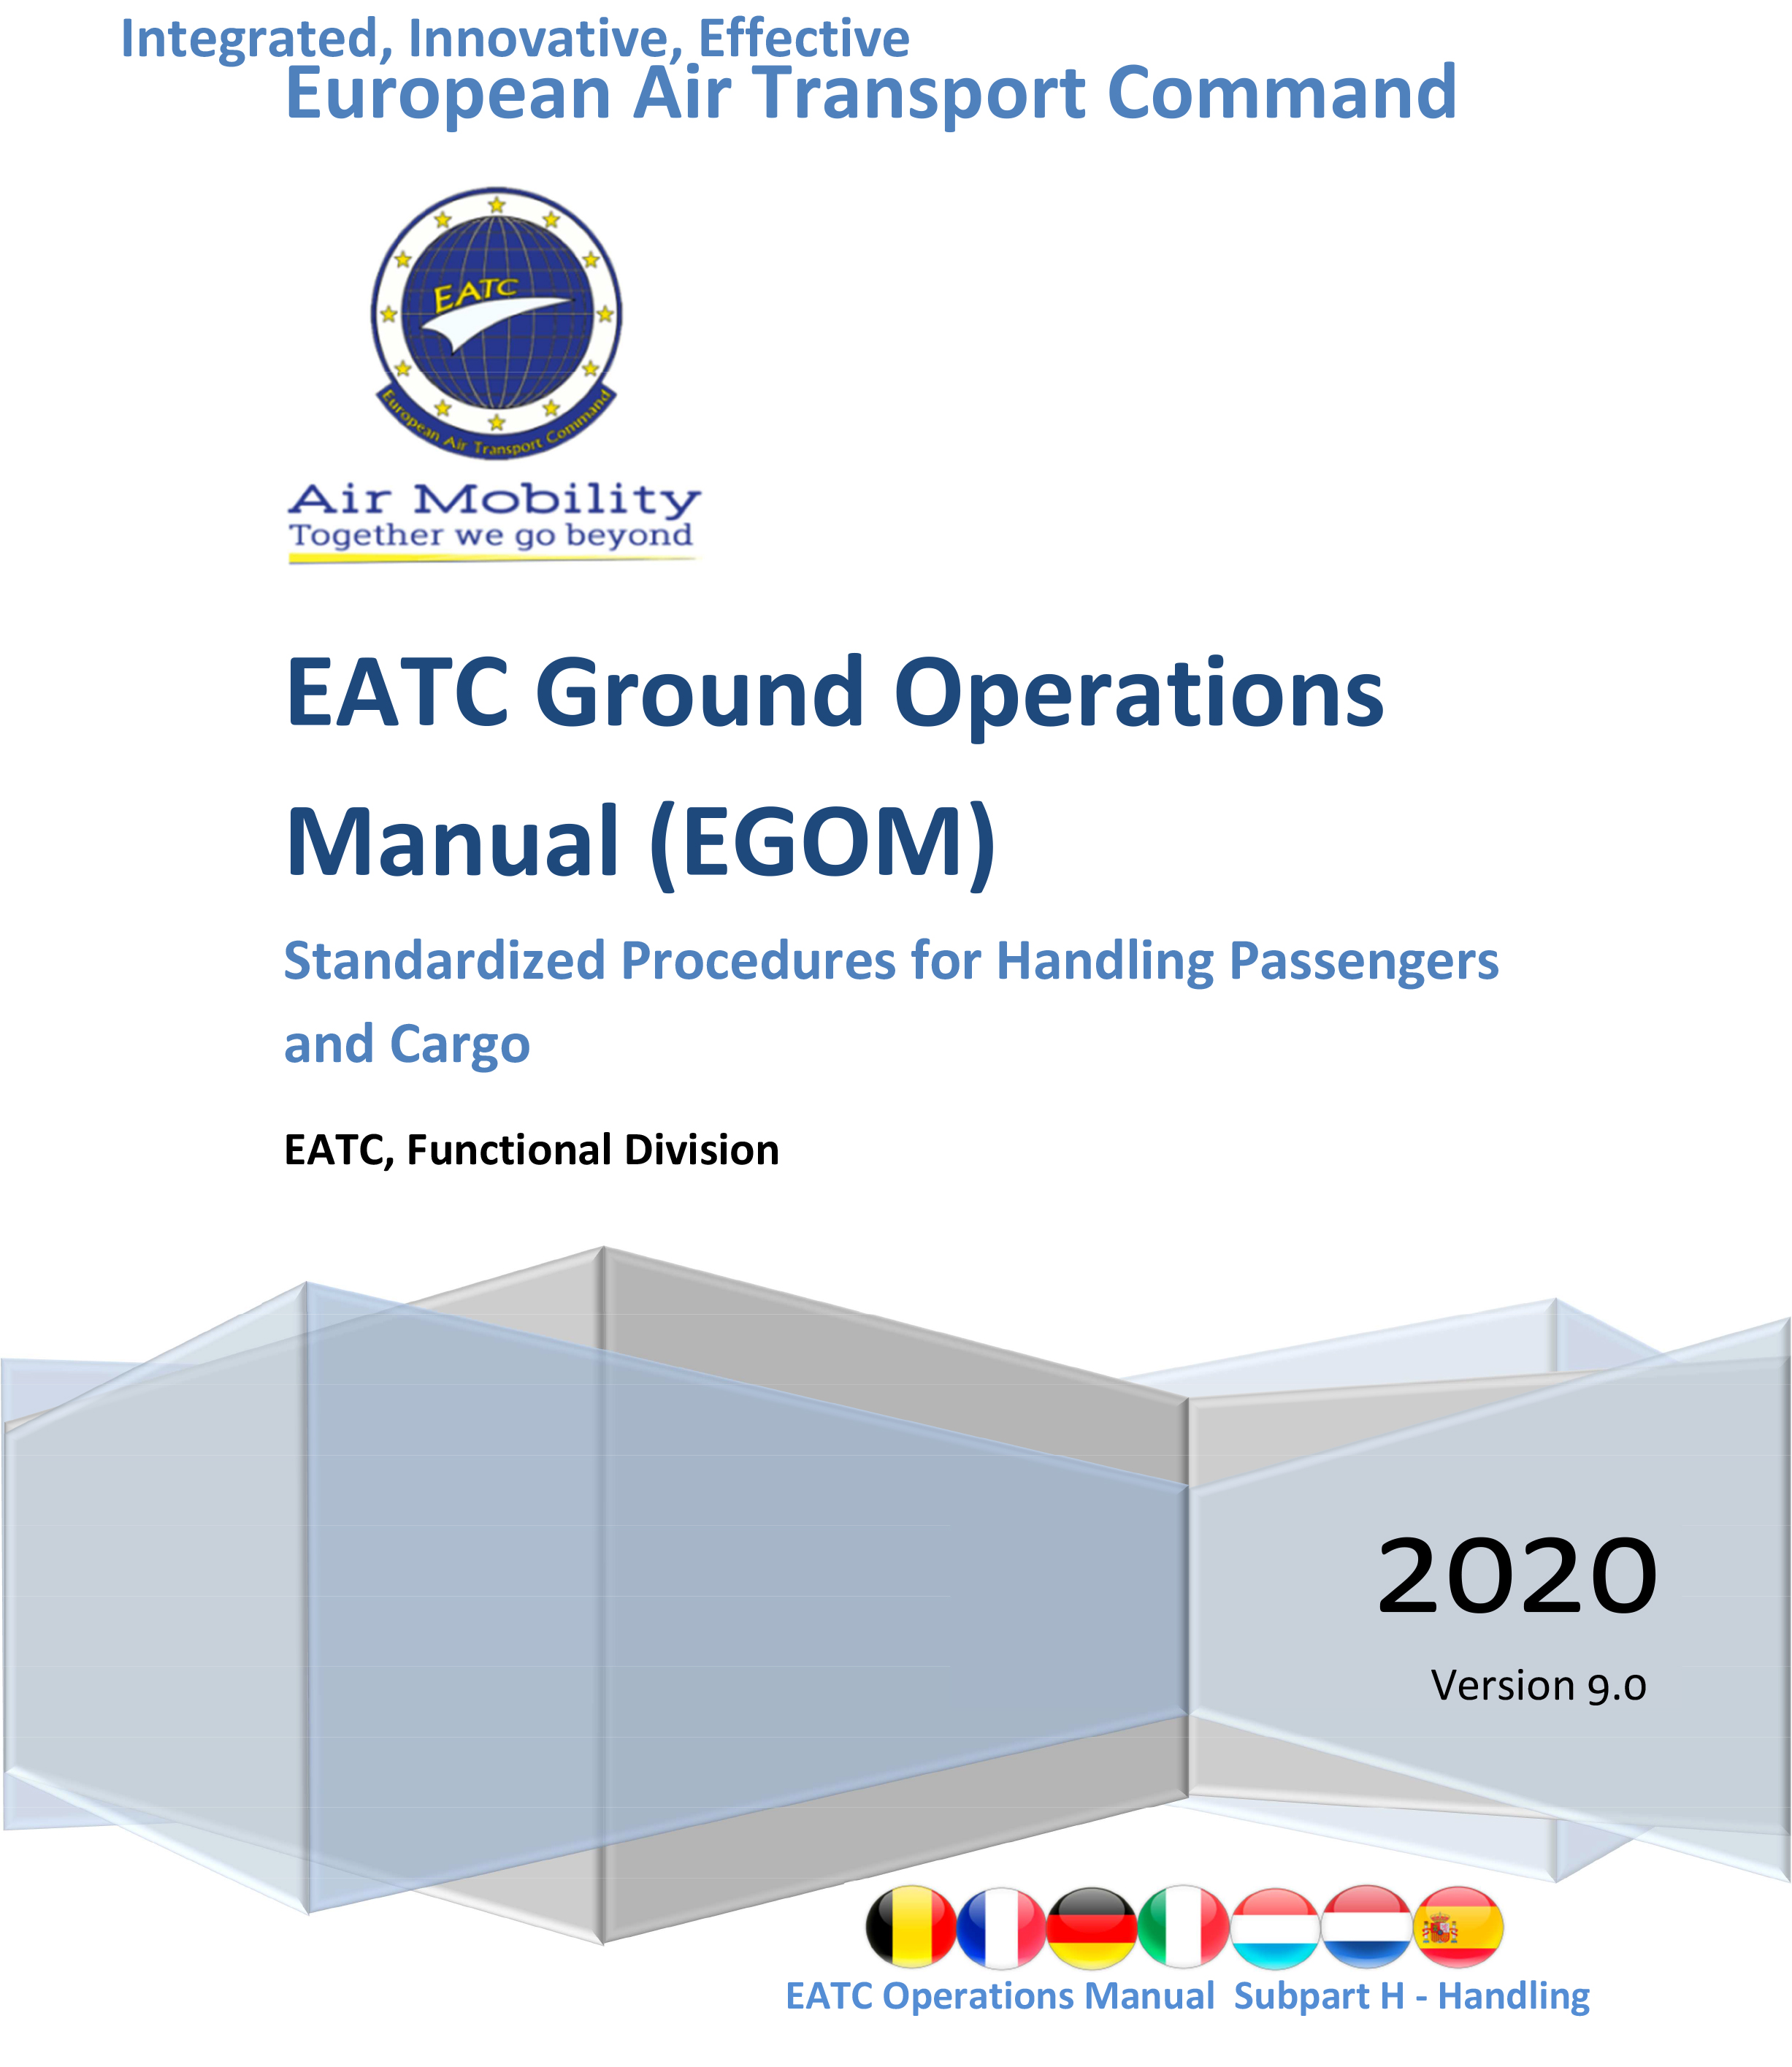 EATC launches its 2020 edition of the “Ground Operations Manual”.